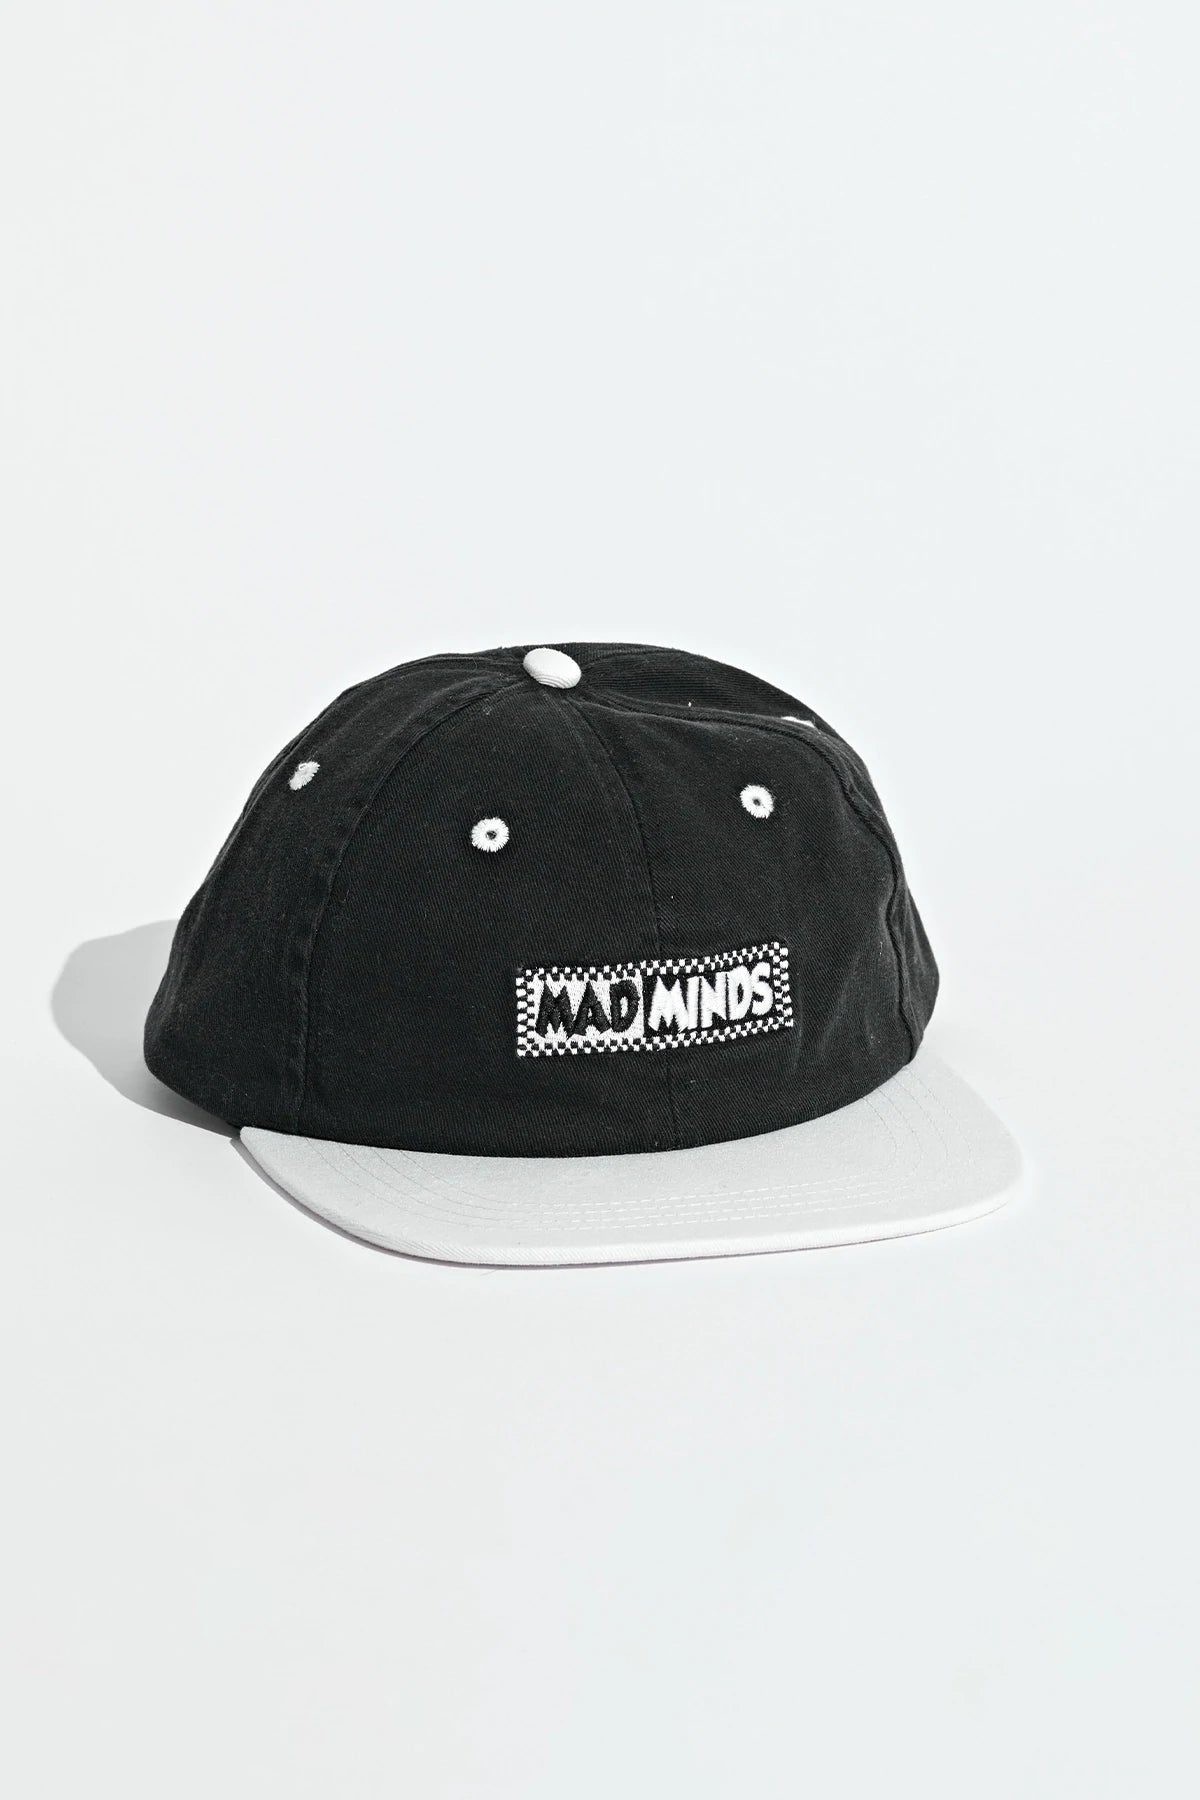 MISFIT // Message To You Snapback BLACK/WHITE